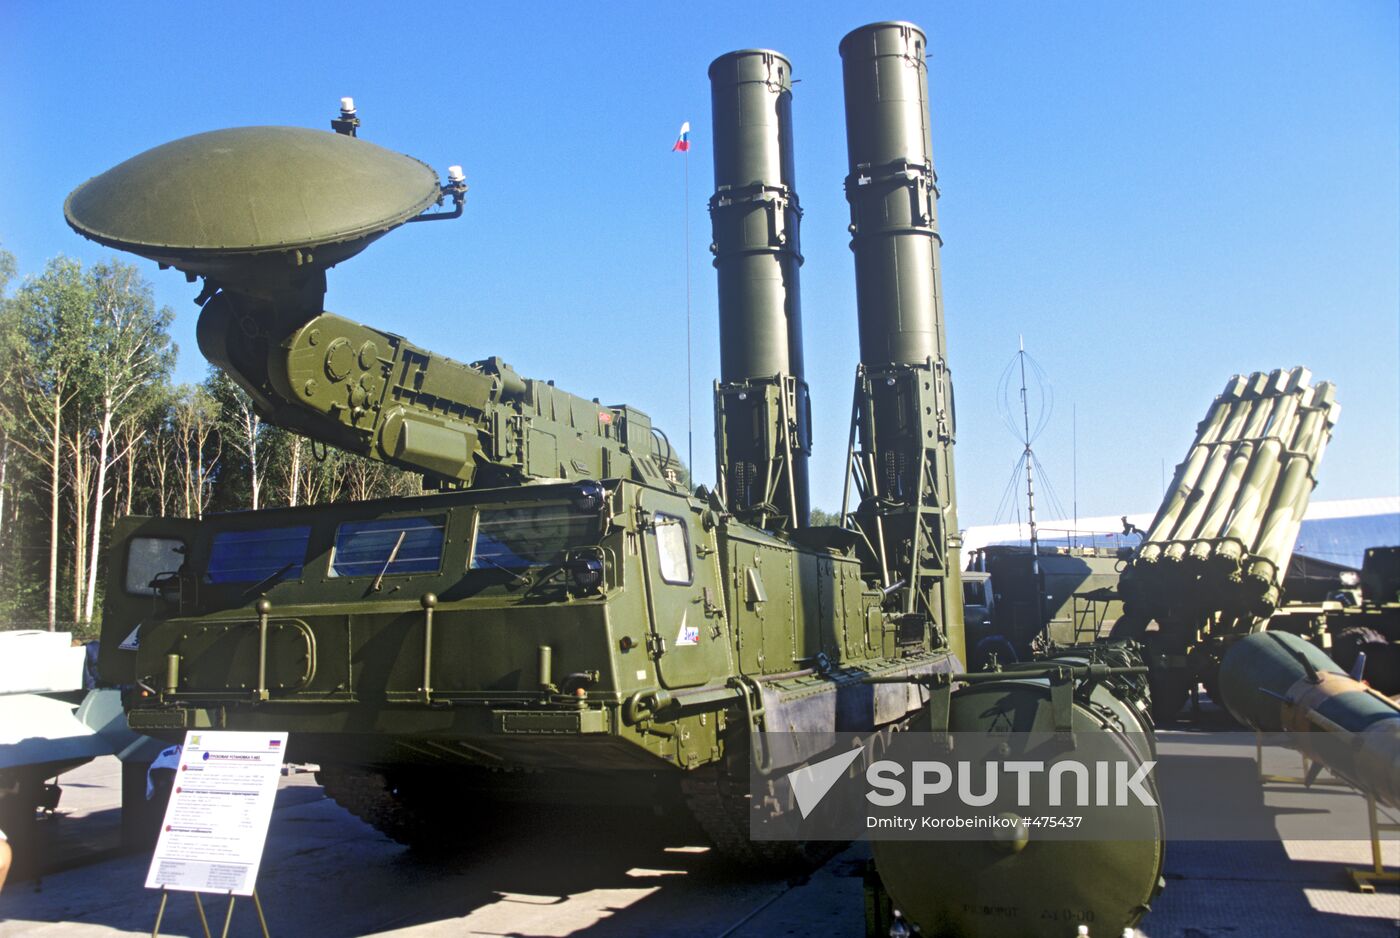 S-300 air defense missile system